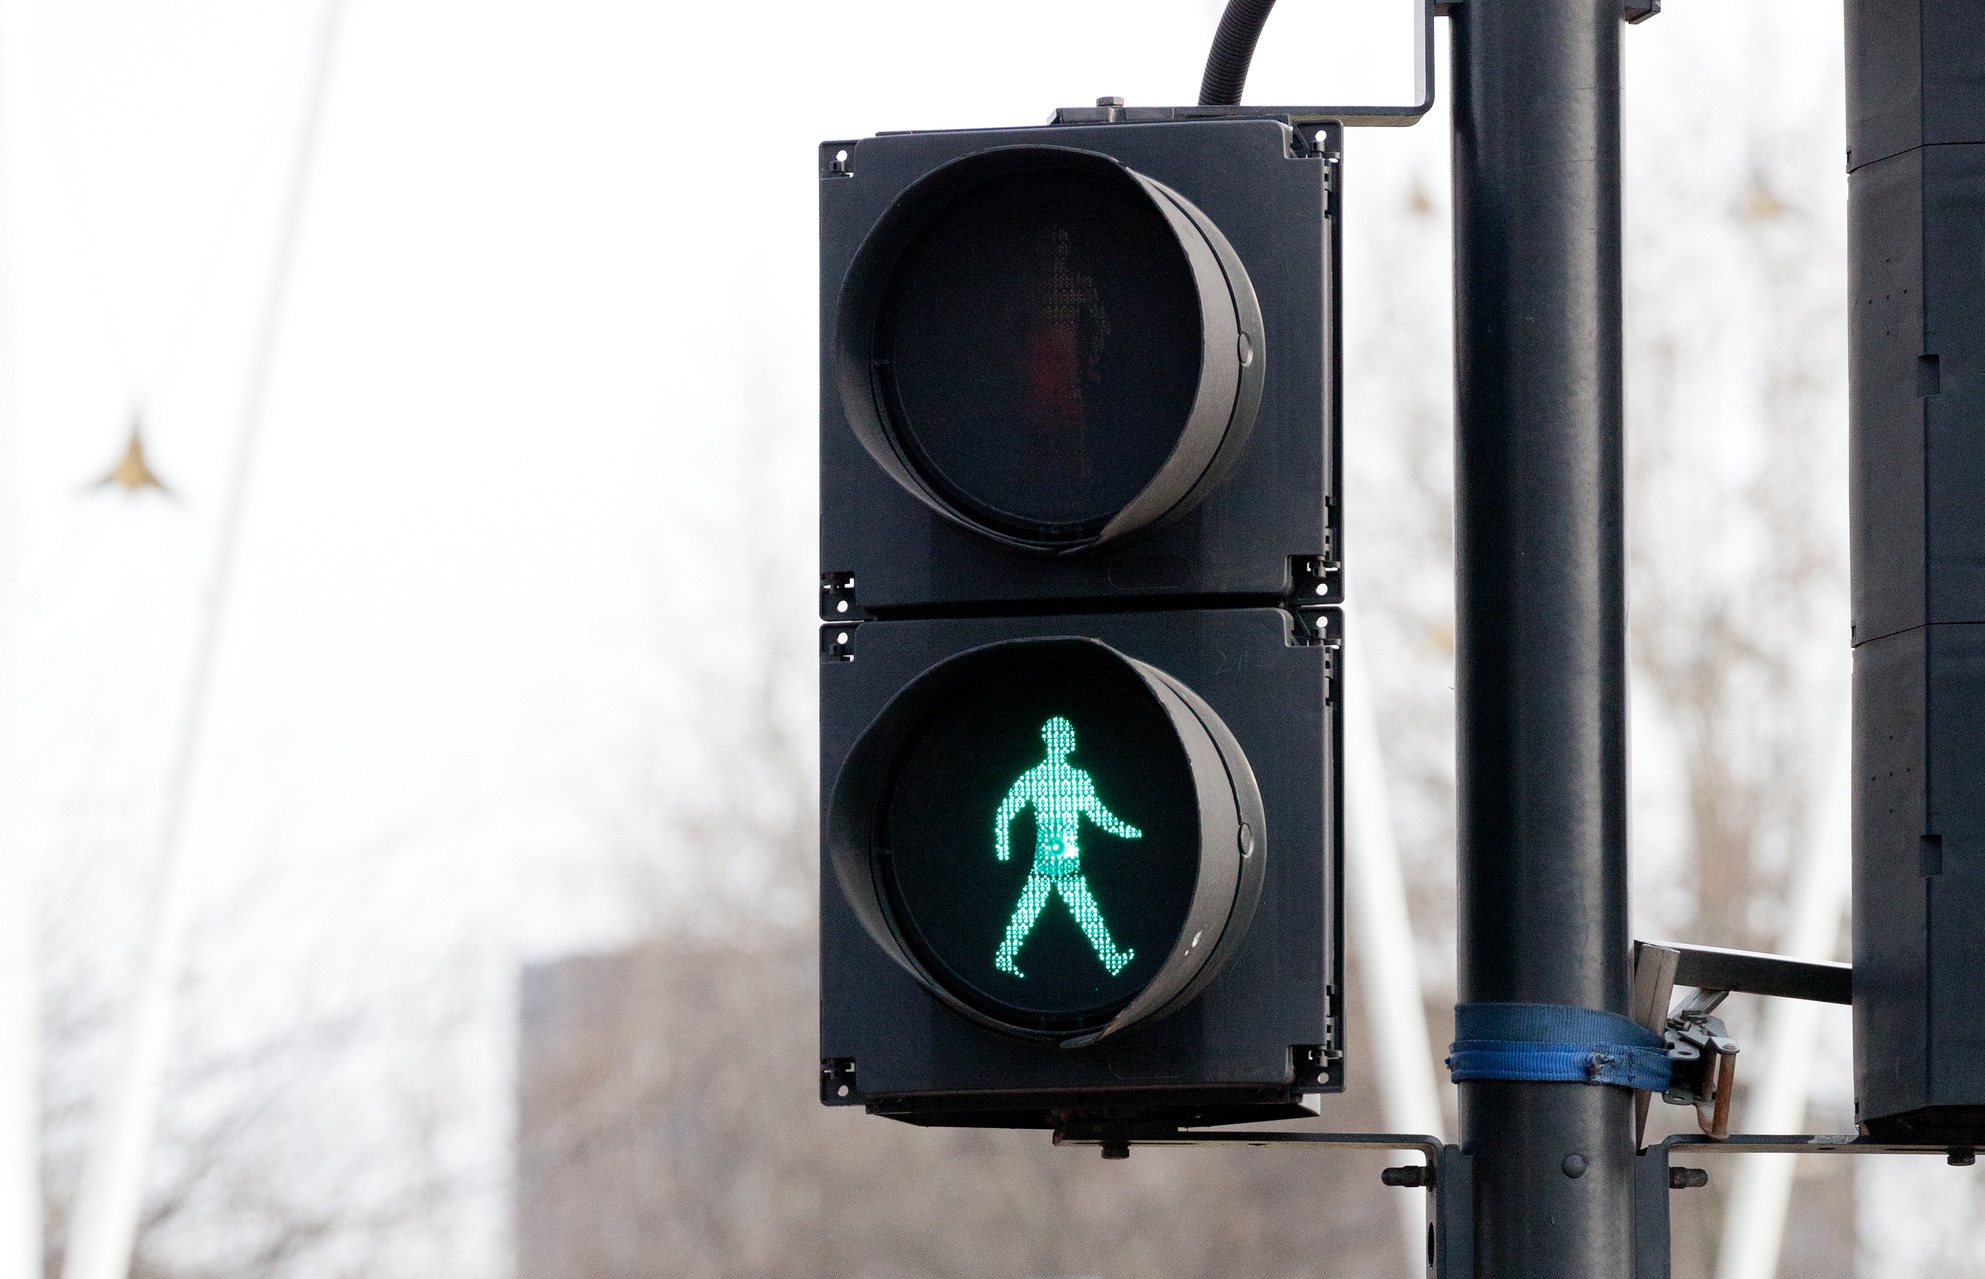 New TfL data shows success of innovative pedestrian priority traffic signals trial